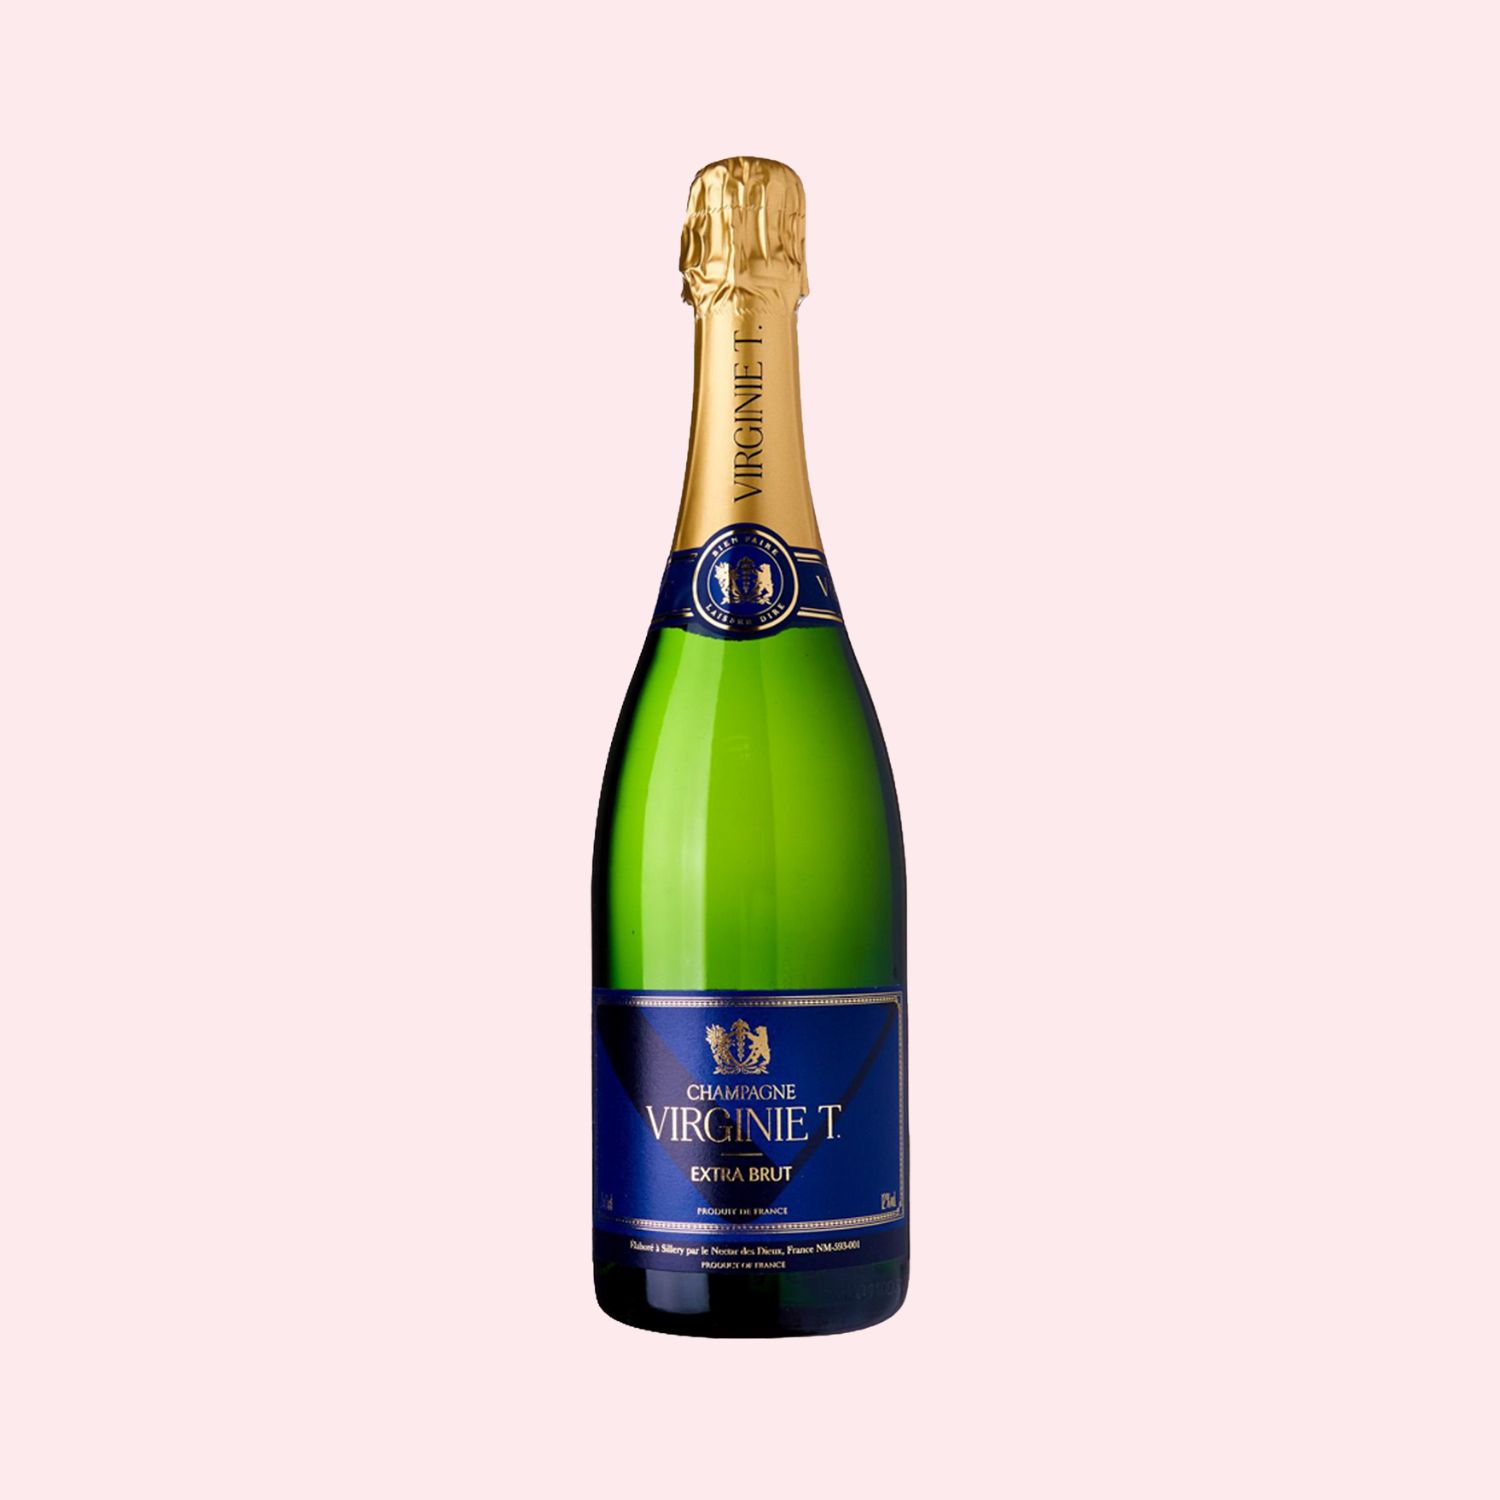 CHAMPAGNE VIRGINIE T EXTRA BRUT-Ambrosia Daily